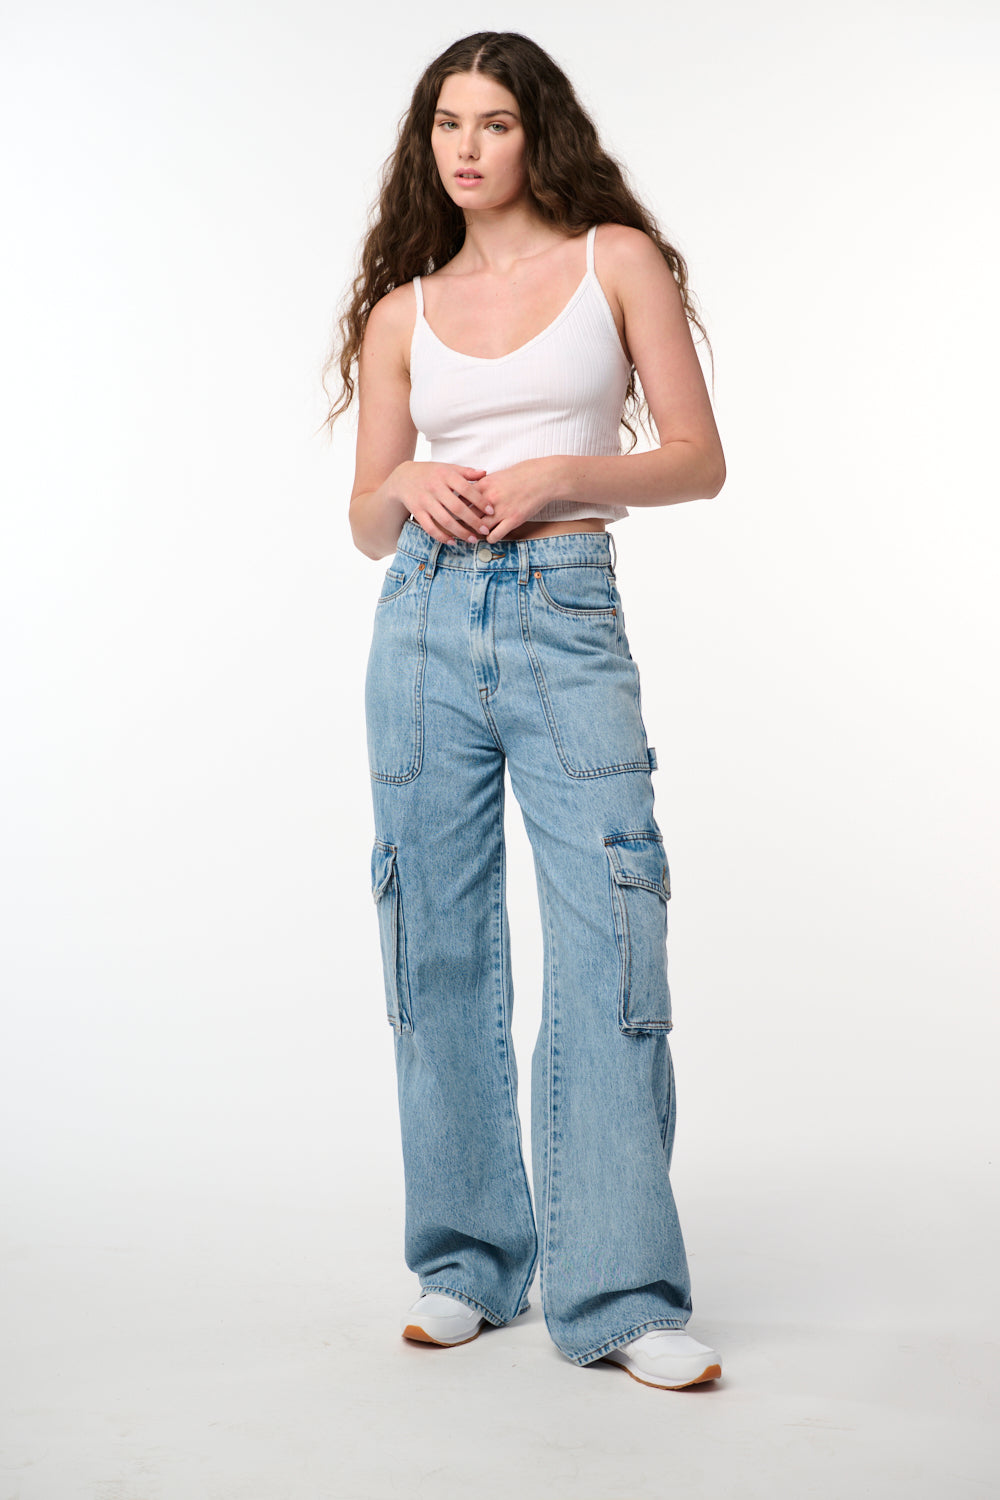 The Franklin In All Heart Pant